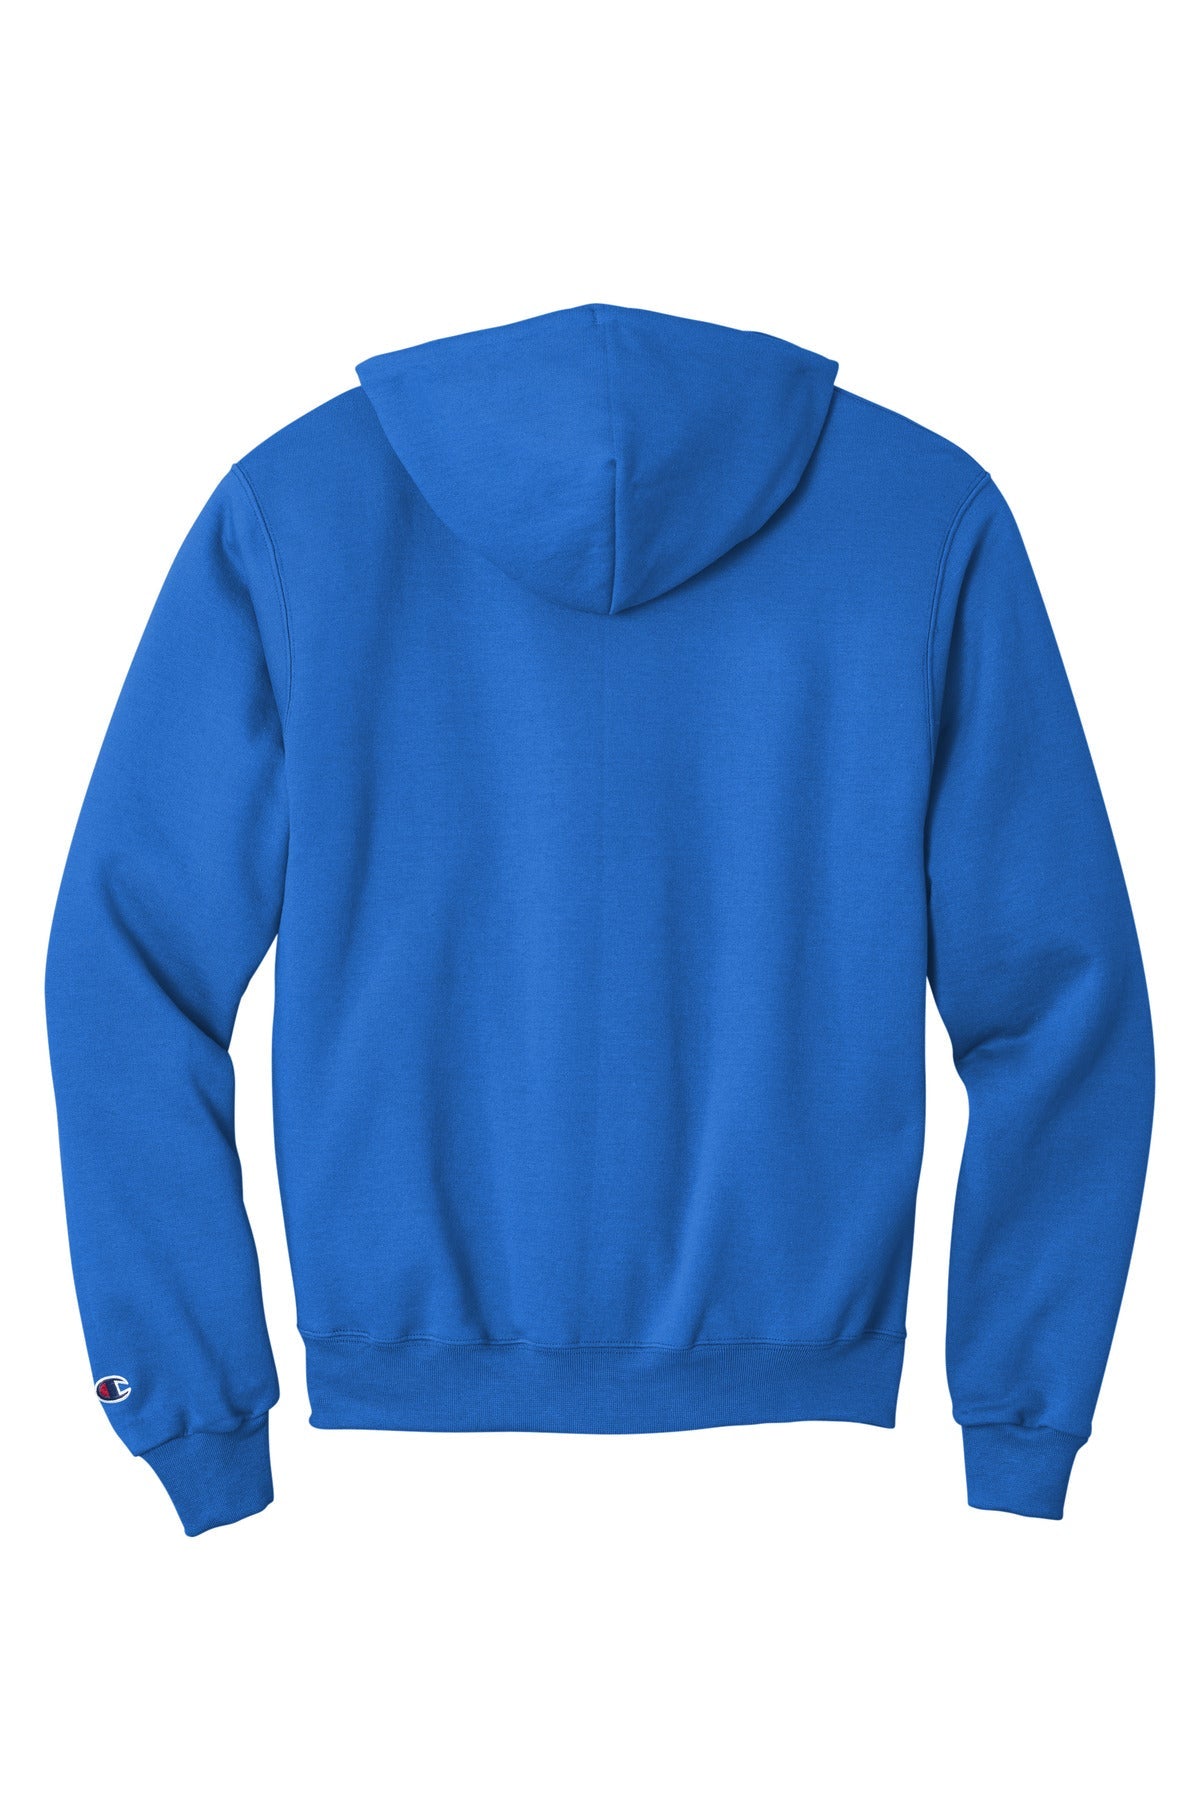 Champion Powerblend Pullover Hoodie. S700 - BT Imprintables Shirts